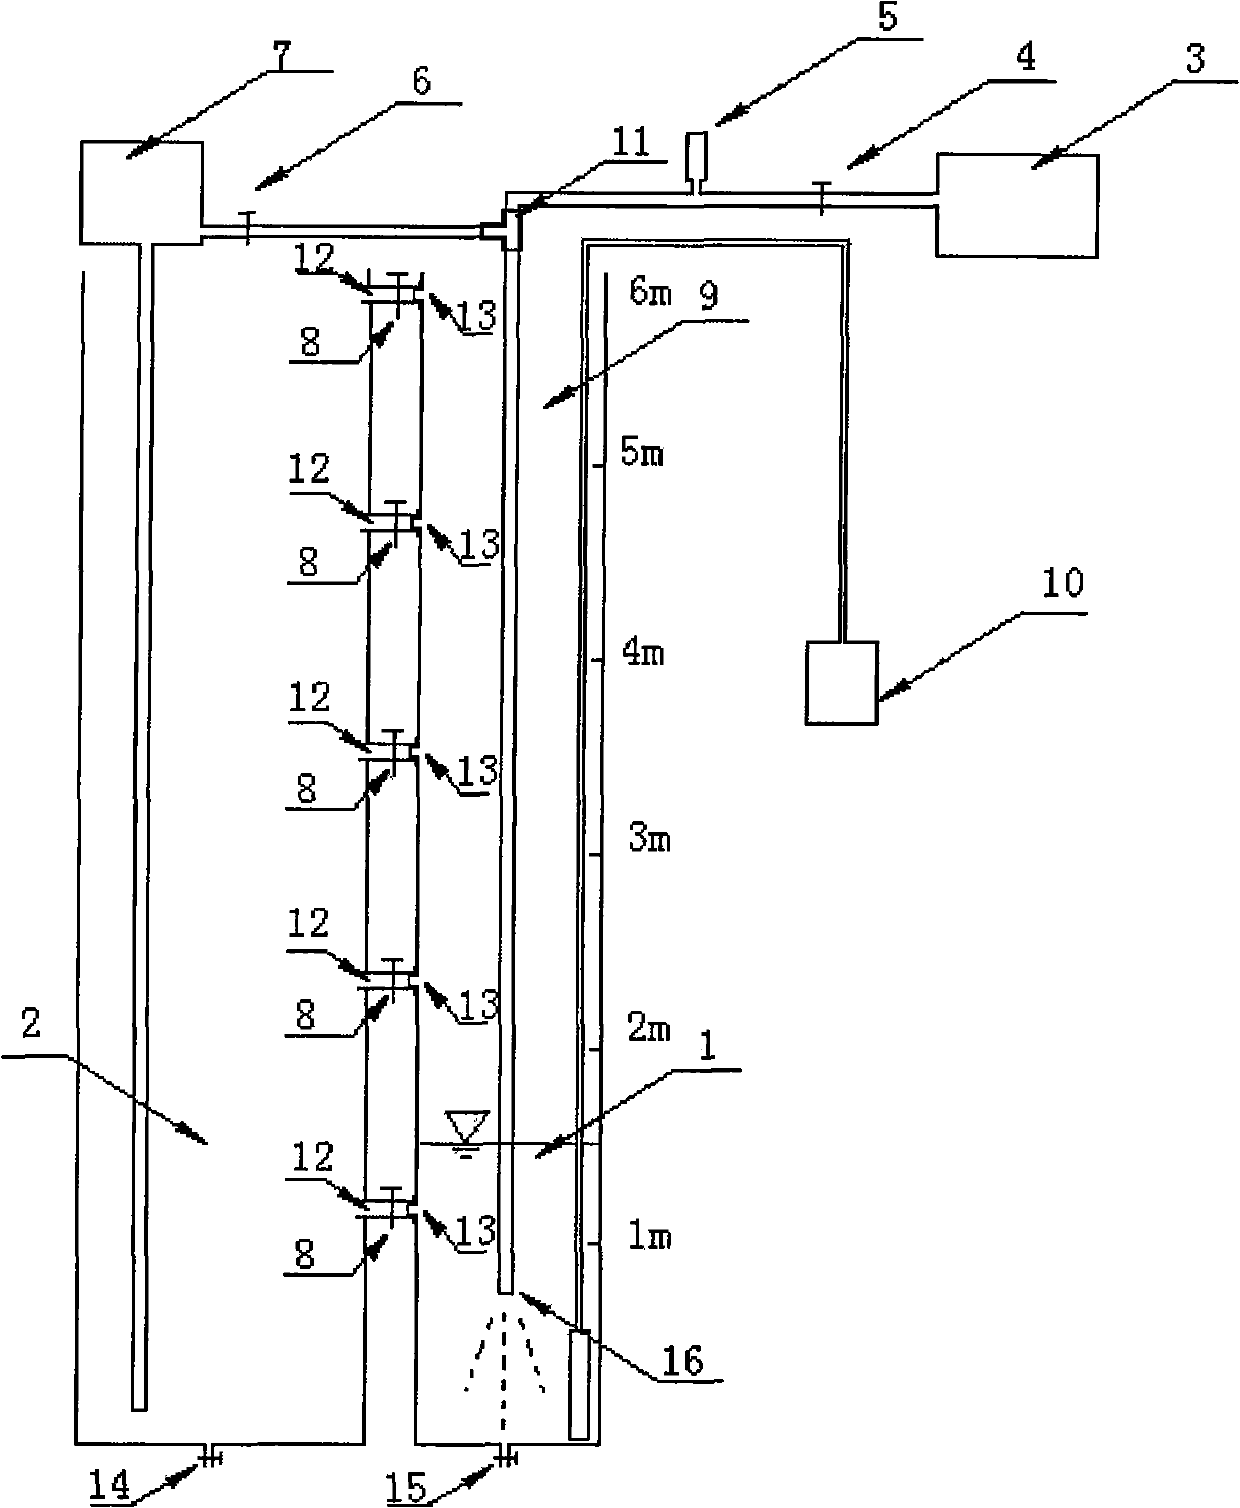 Experimental device for forming jet flow by drifting water with high-speed airflow and generating supersaturated total dissolved gas